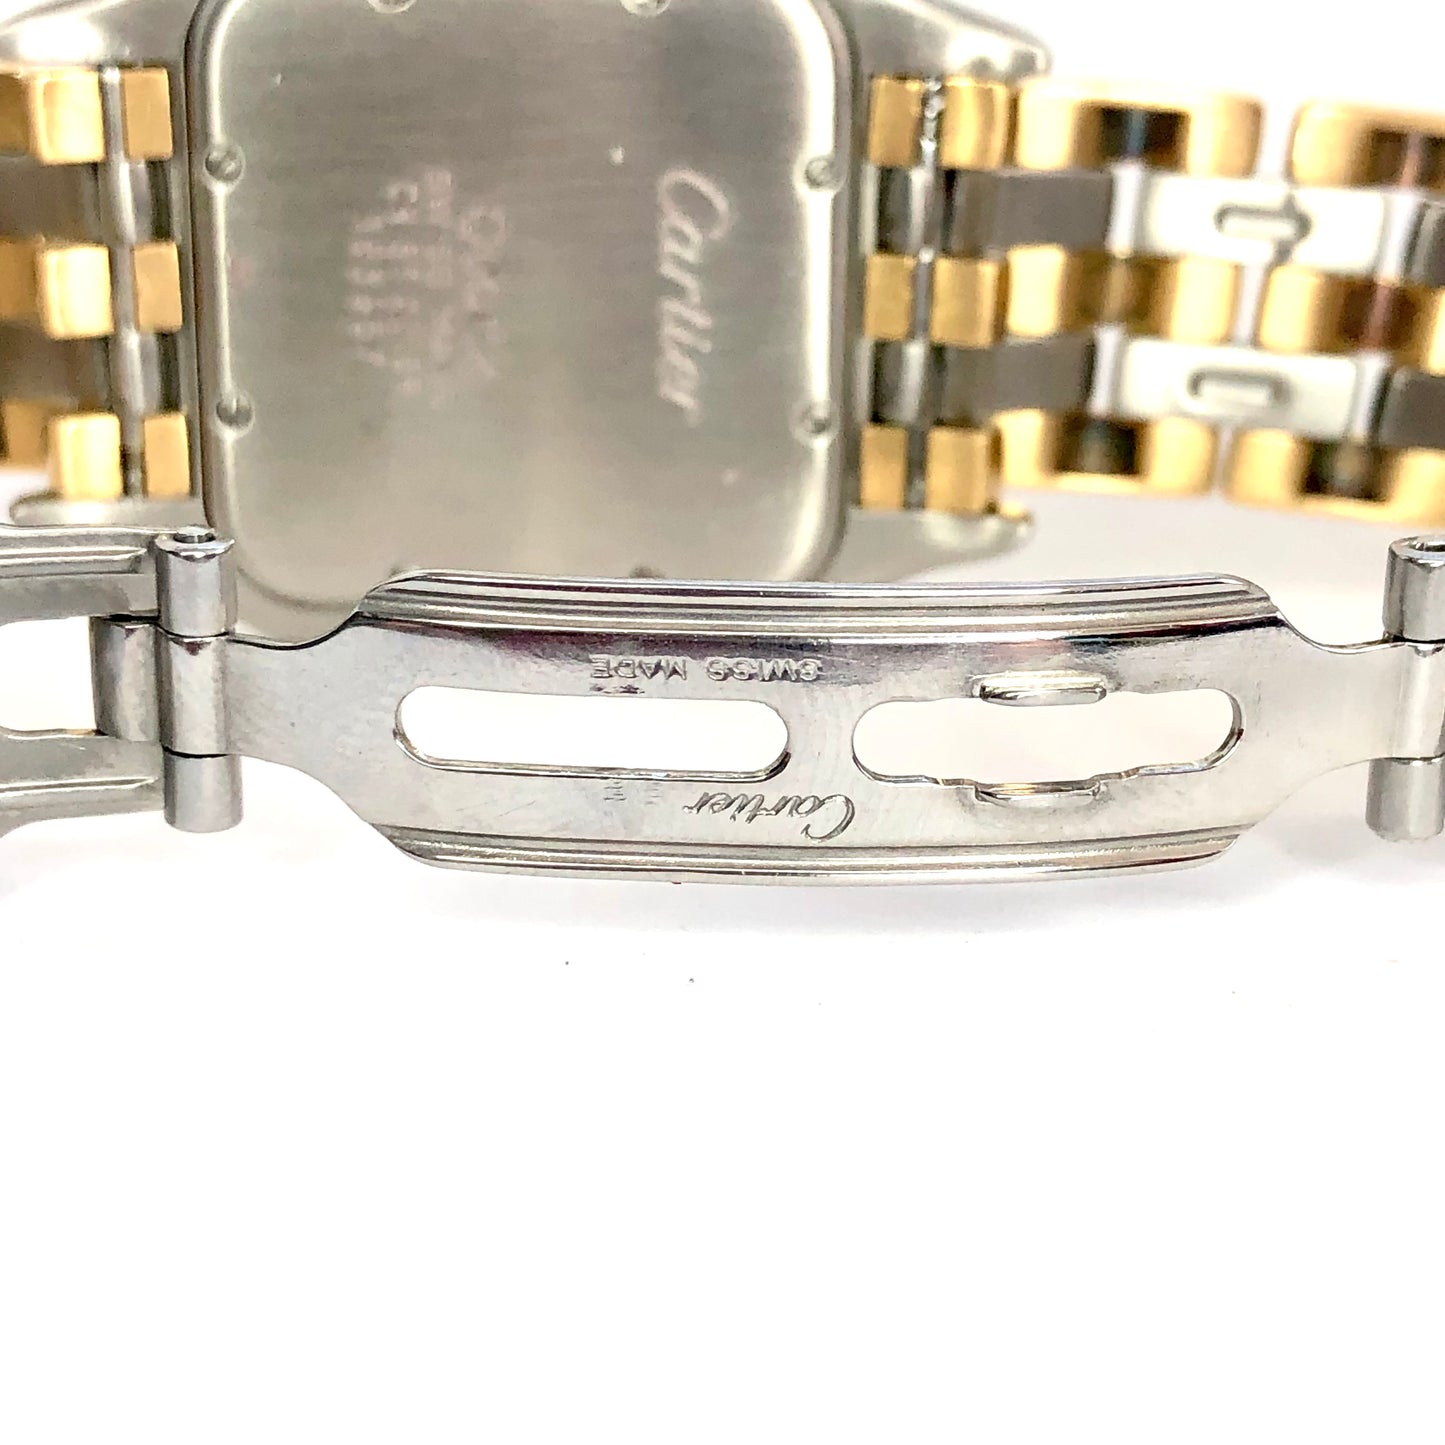 CARTIER PANTHERE 29mm 3 Row Gold 0.55TCW DIAMOND Watch